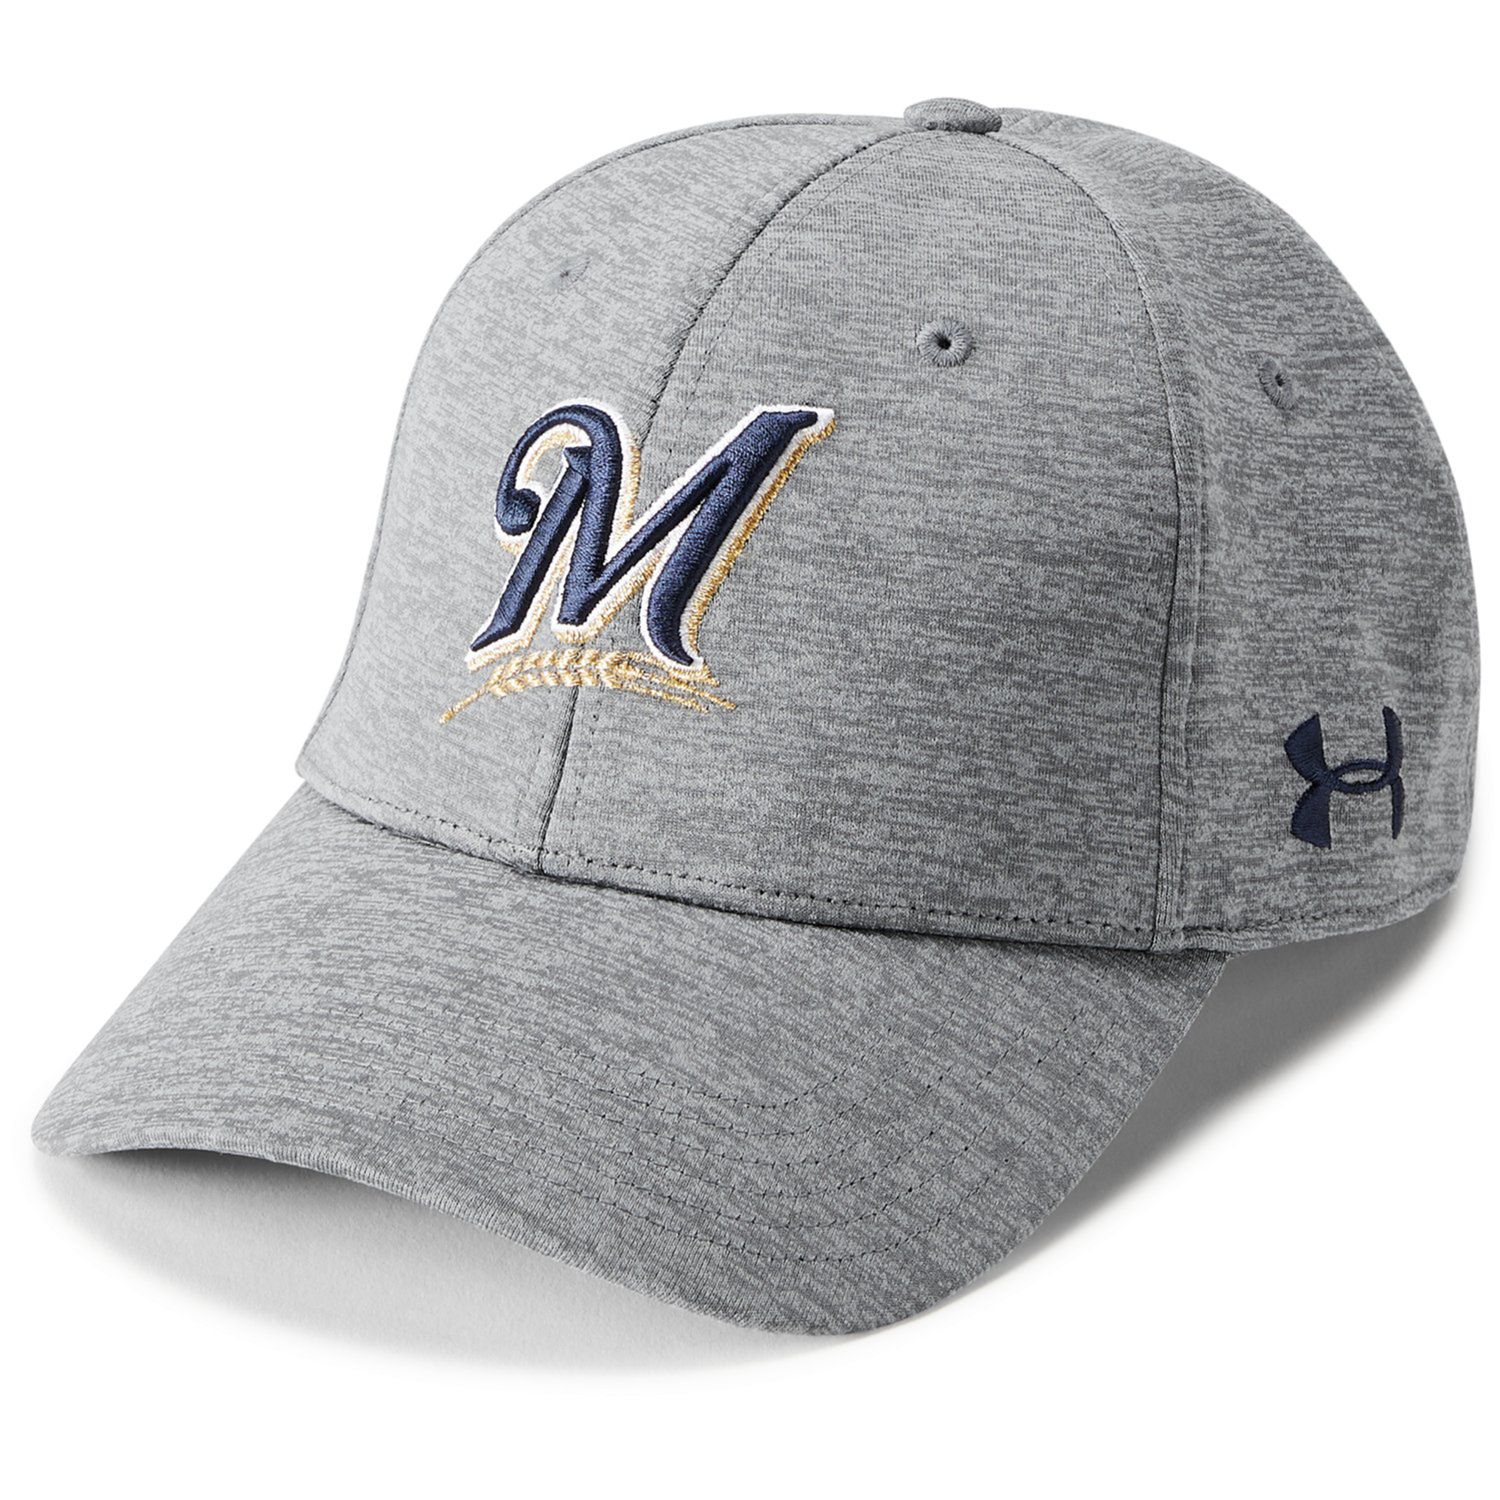 under armour brewers hat